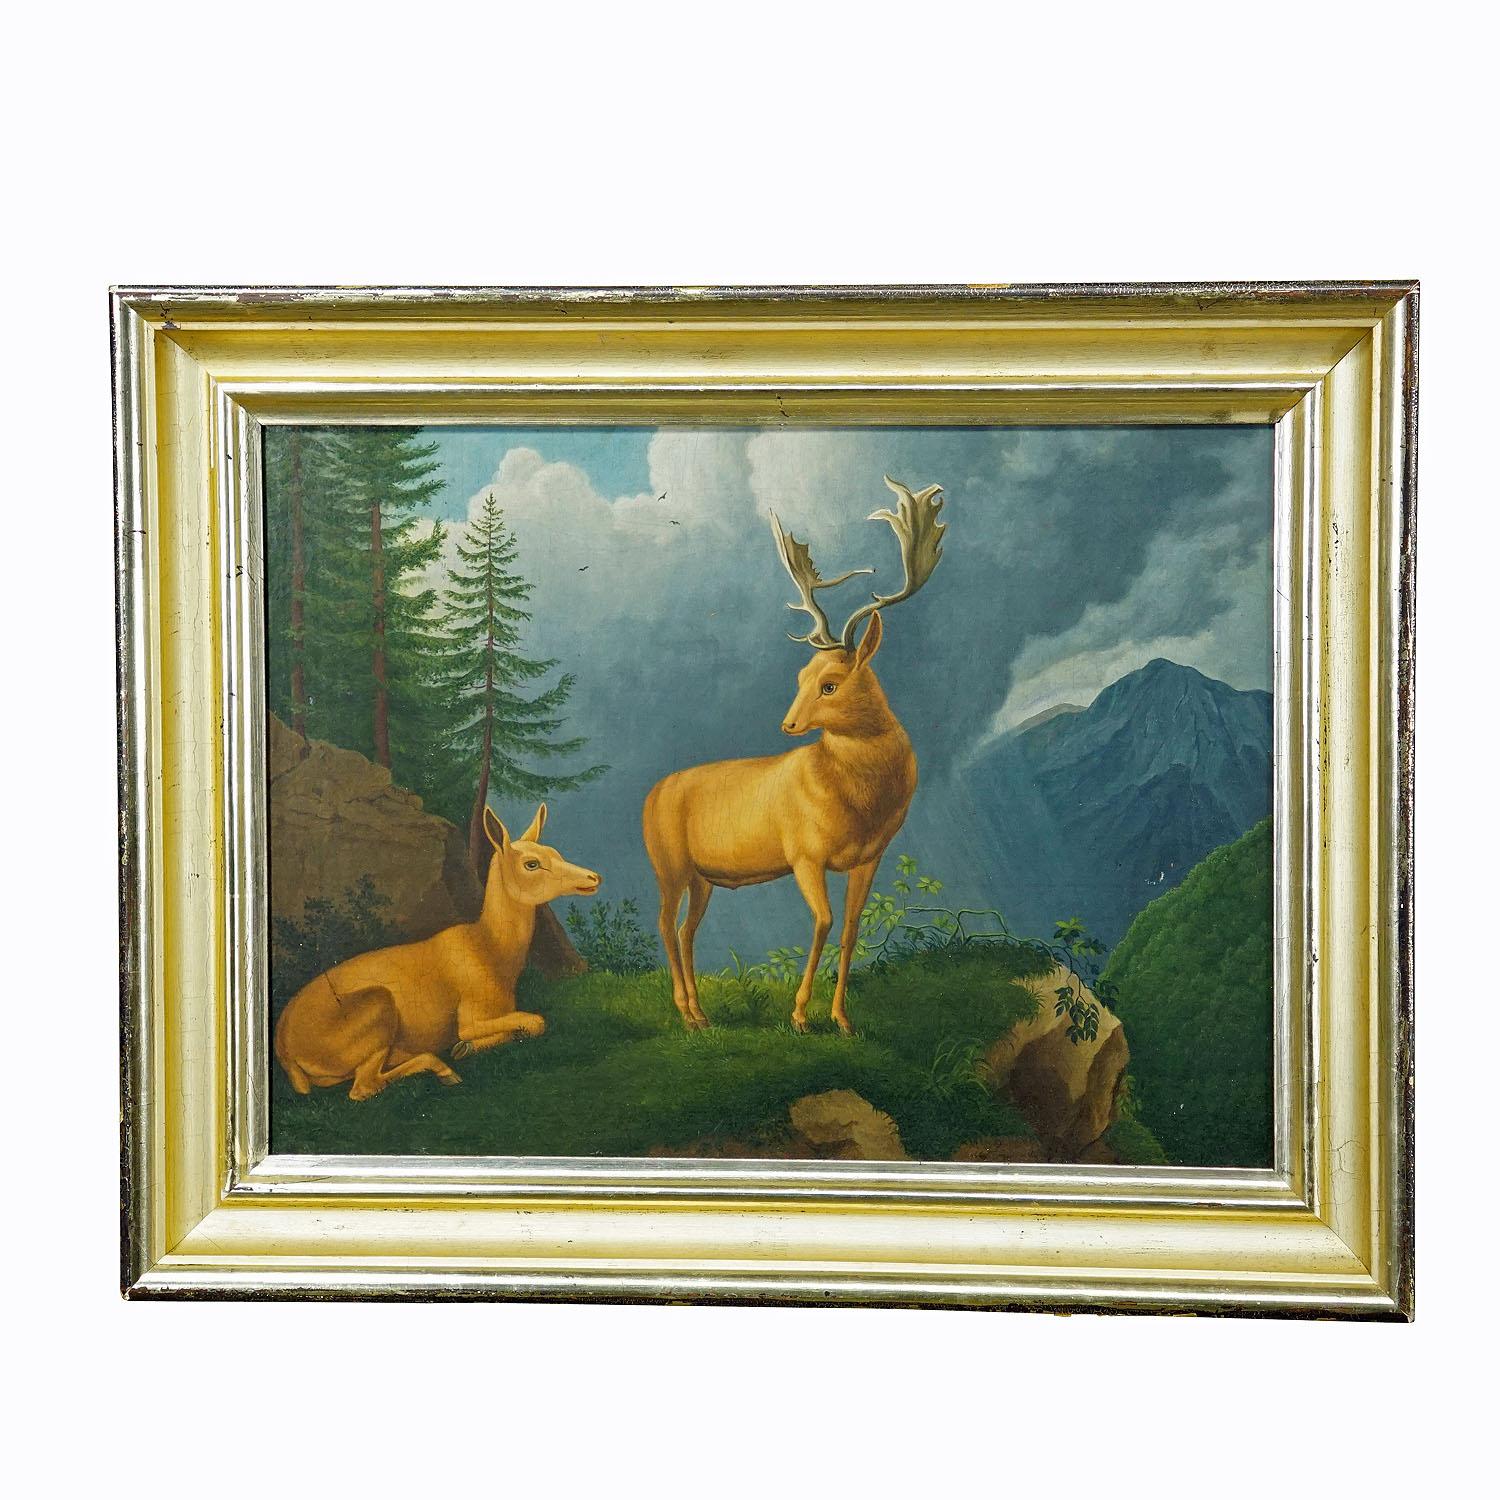 Unknown - Painting Fallow Deer with Doe in the Alps, Oil on Canvas 19th century

A lovely Biedermeier style oil painting depicting a fallow deer family in the alpine landscape. Oil on canvas 1st halve of the 19th century. Framed with antique gilded